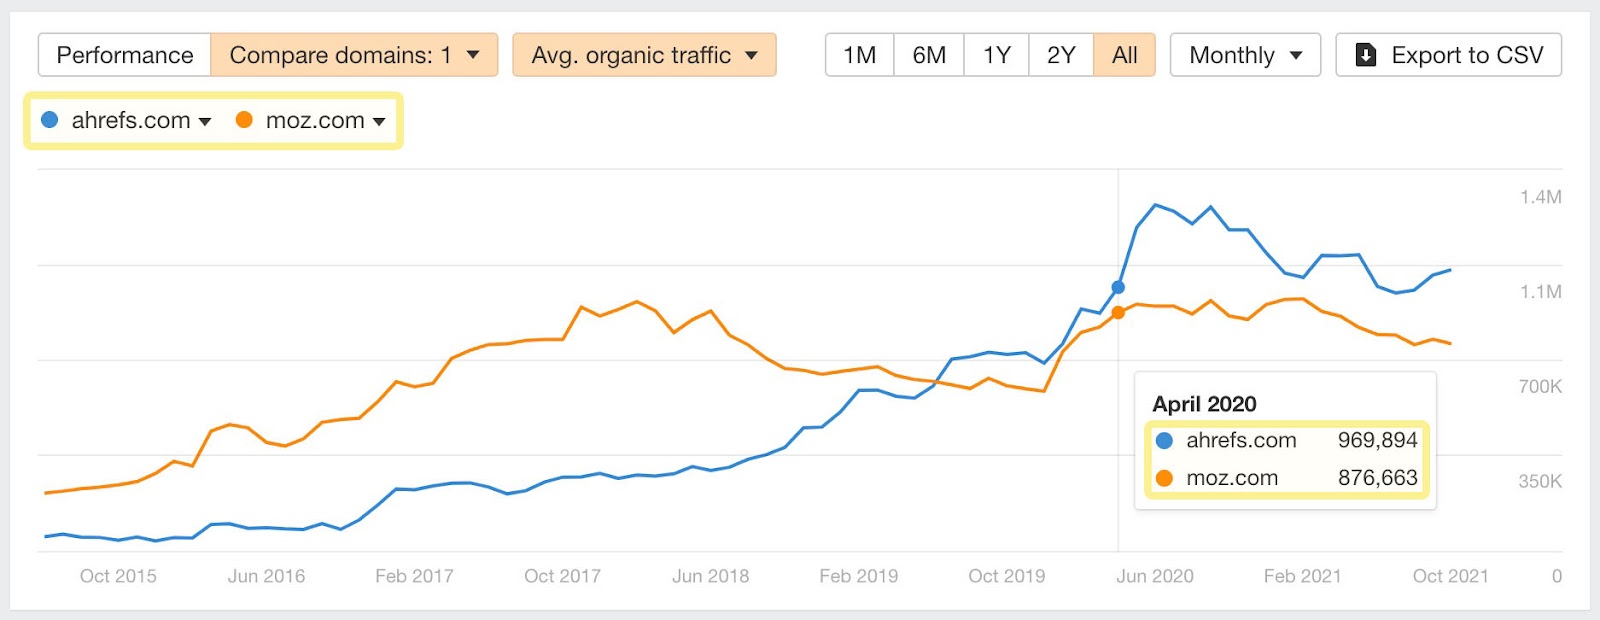 Graph showing Ahrefs' and Moz's respective organic traffic from Oct 2015 to Oct 2021